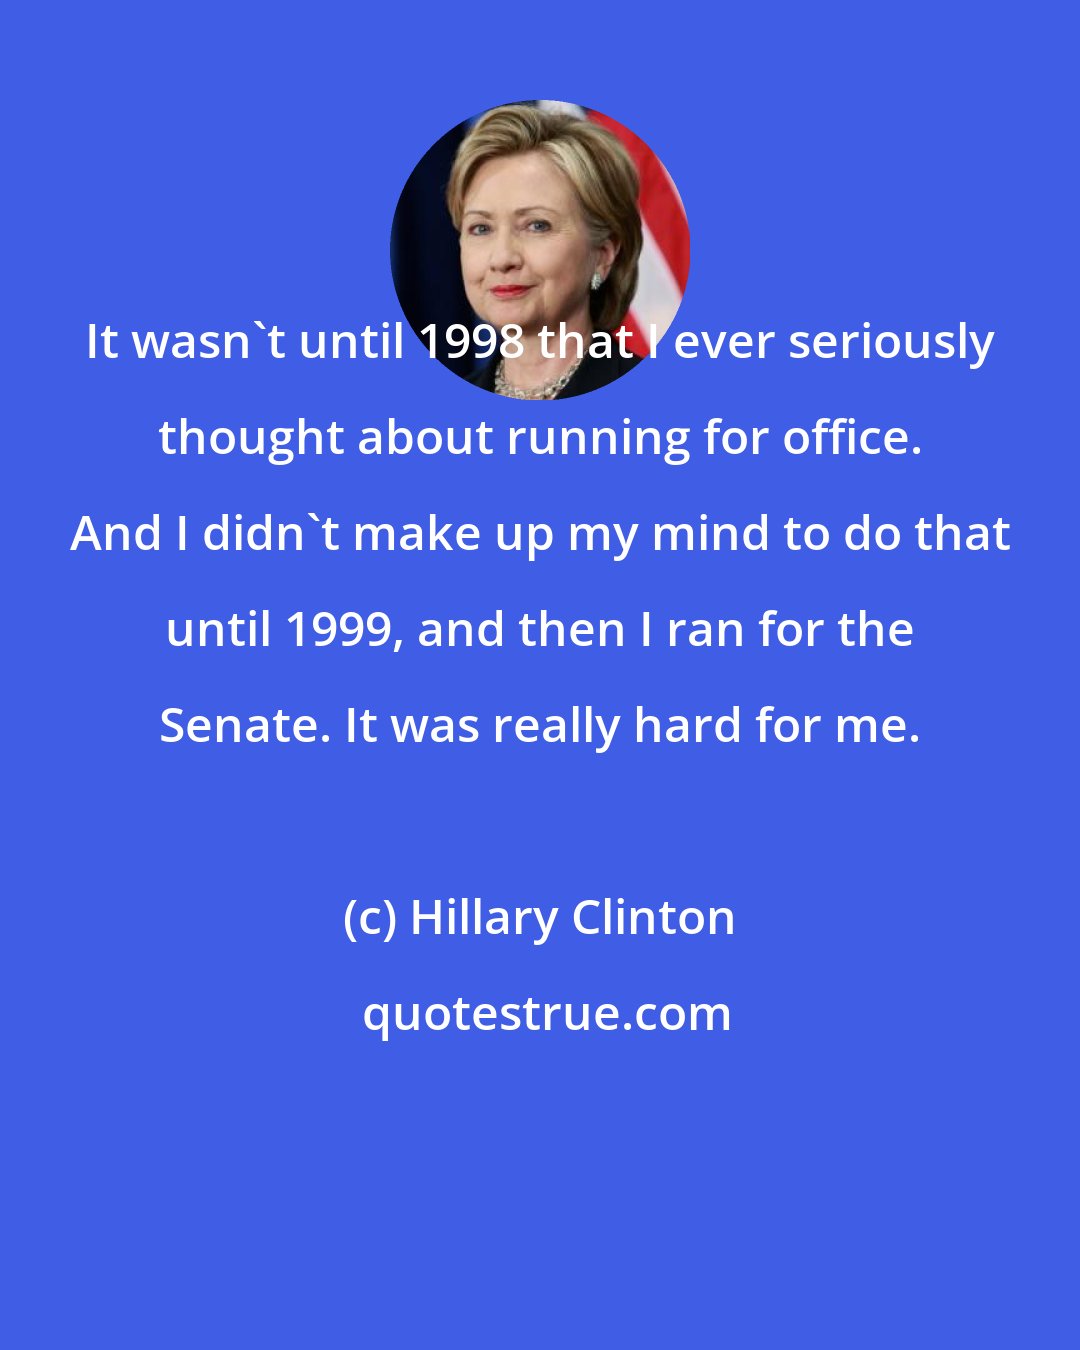 Hillary Clinton: It wasn't until 1998 that I ever seriously thought about running for office. And I didn't make up my mind to do that until 1999, and then I ran for the Senate. It was really hard for me.